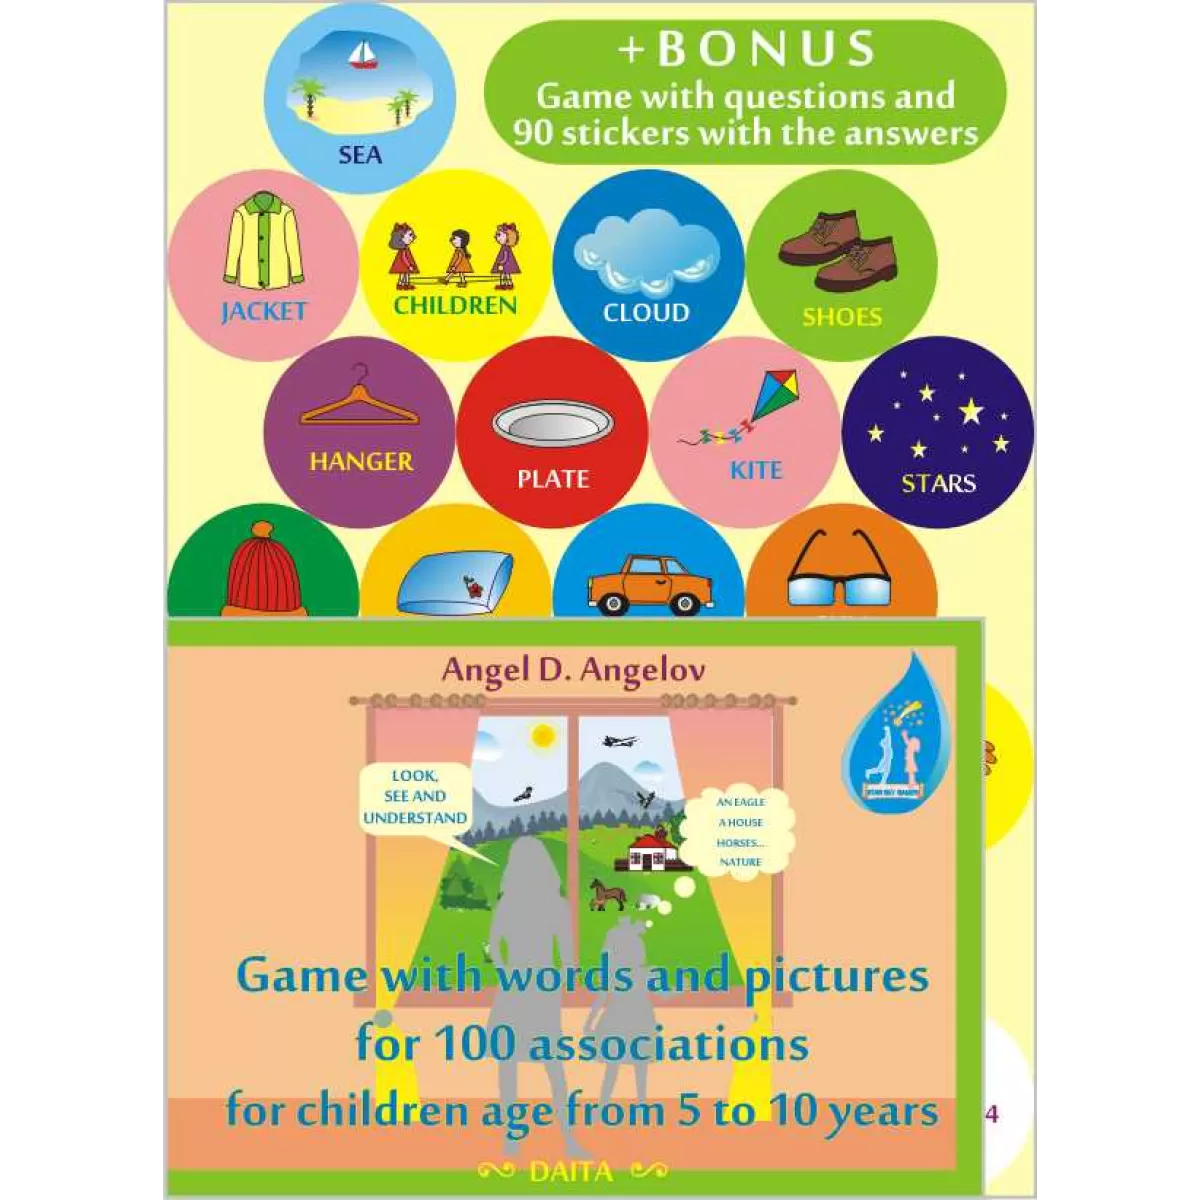 Game with words and pictures for 100 associations for children age from 5 to 10 years